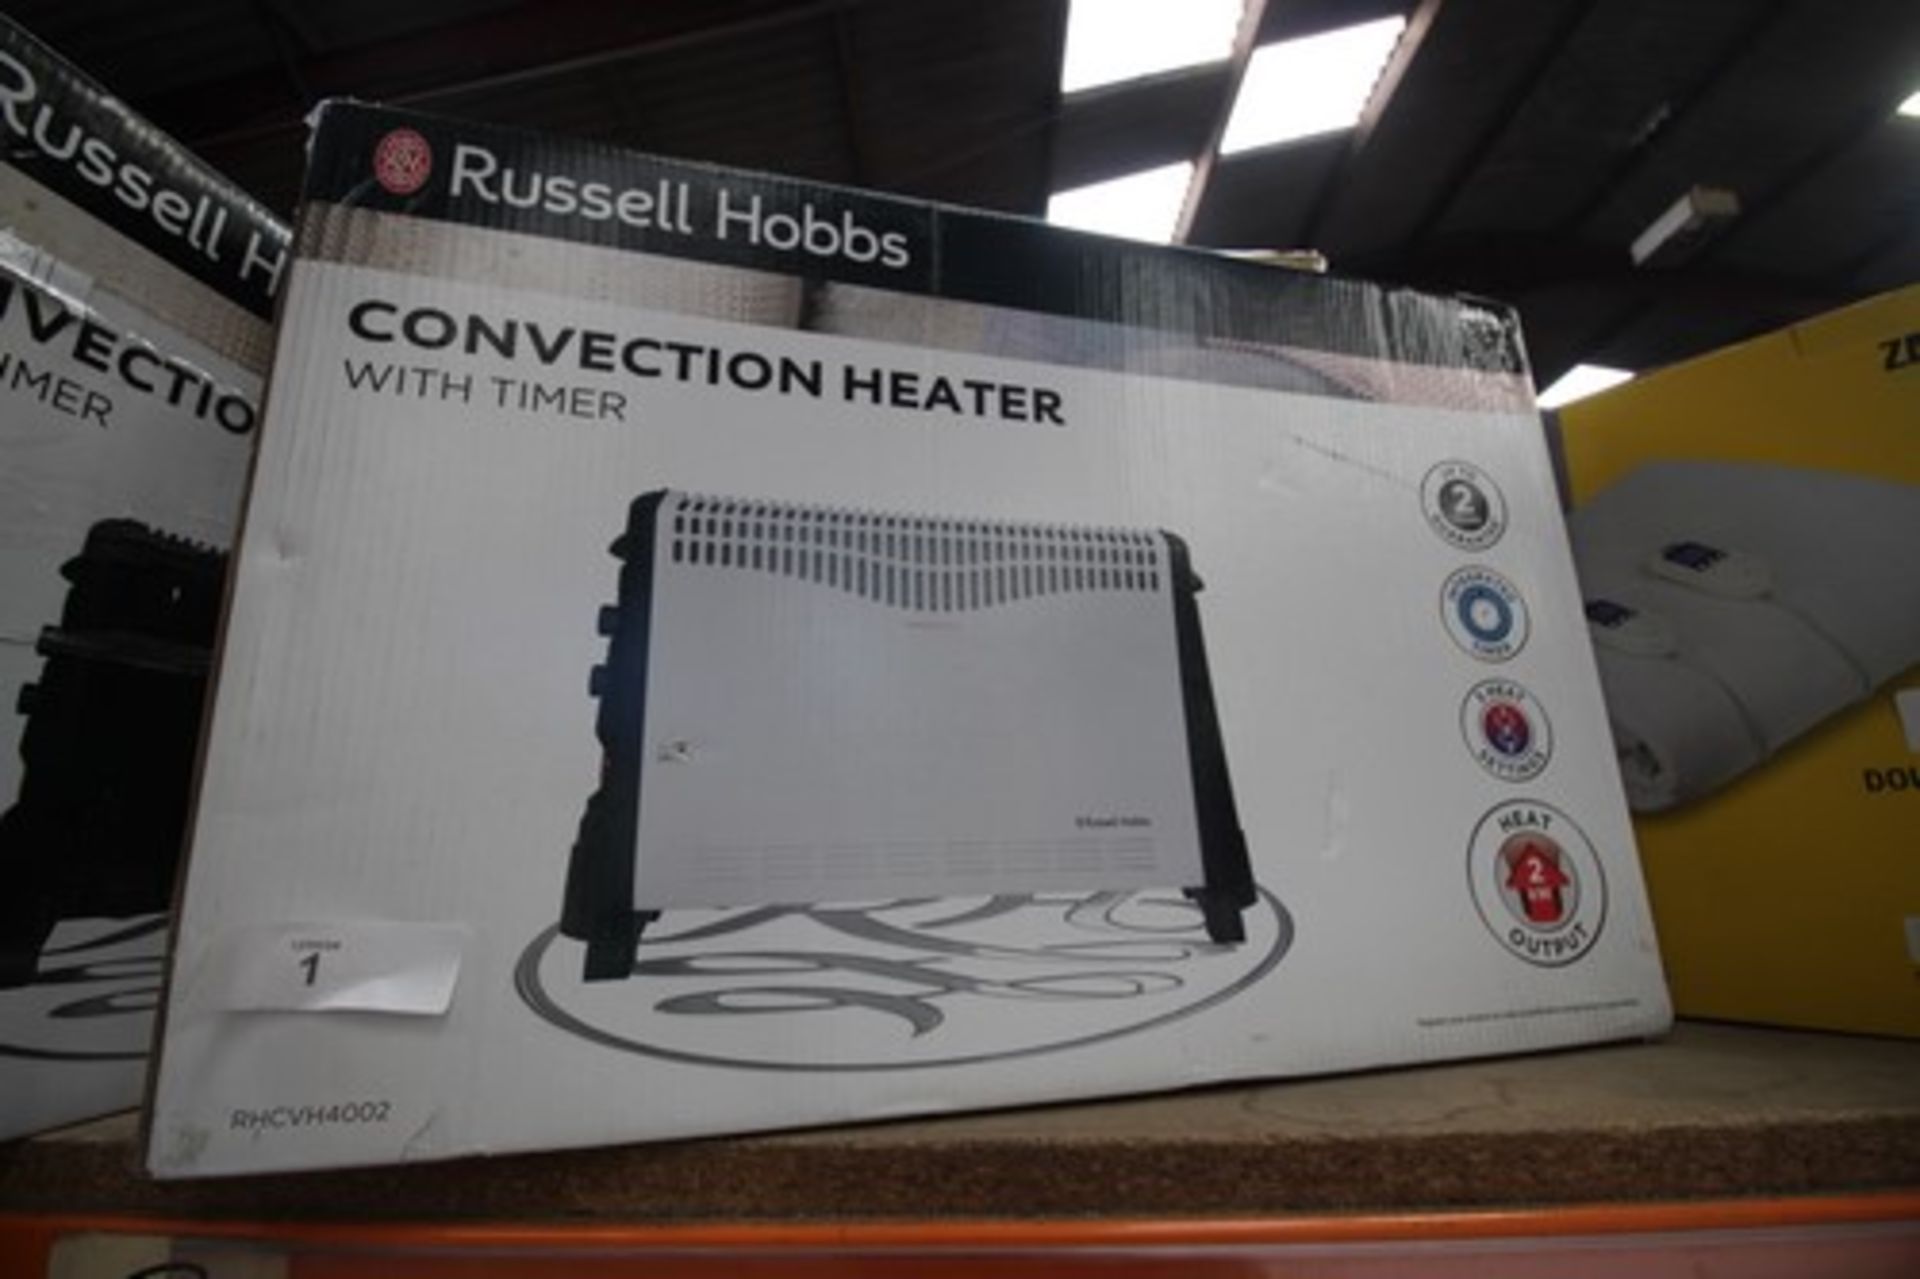 1 x Zanussi double electric blanket, together with 3 x heaters, including Russell Hobbs, etc. - - Image 2 of 3